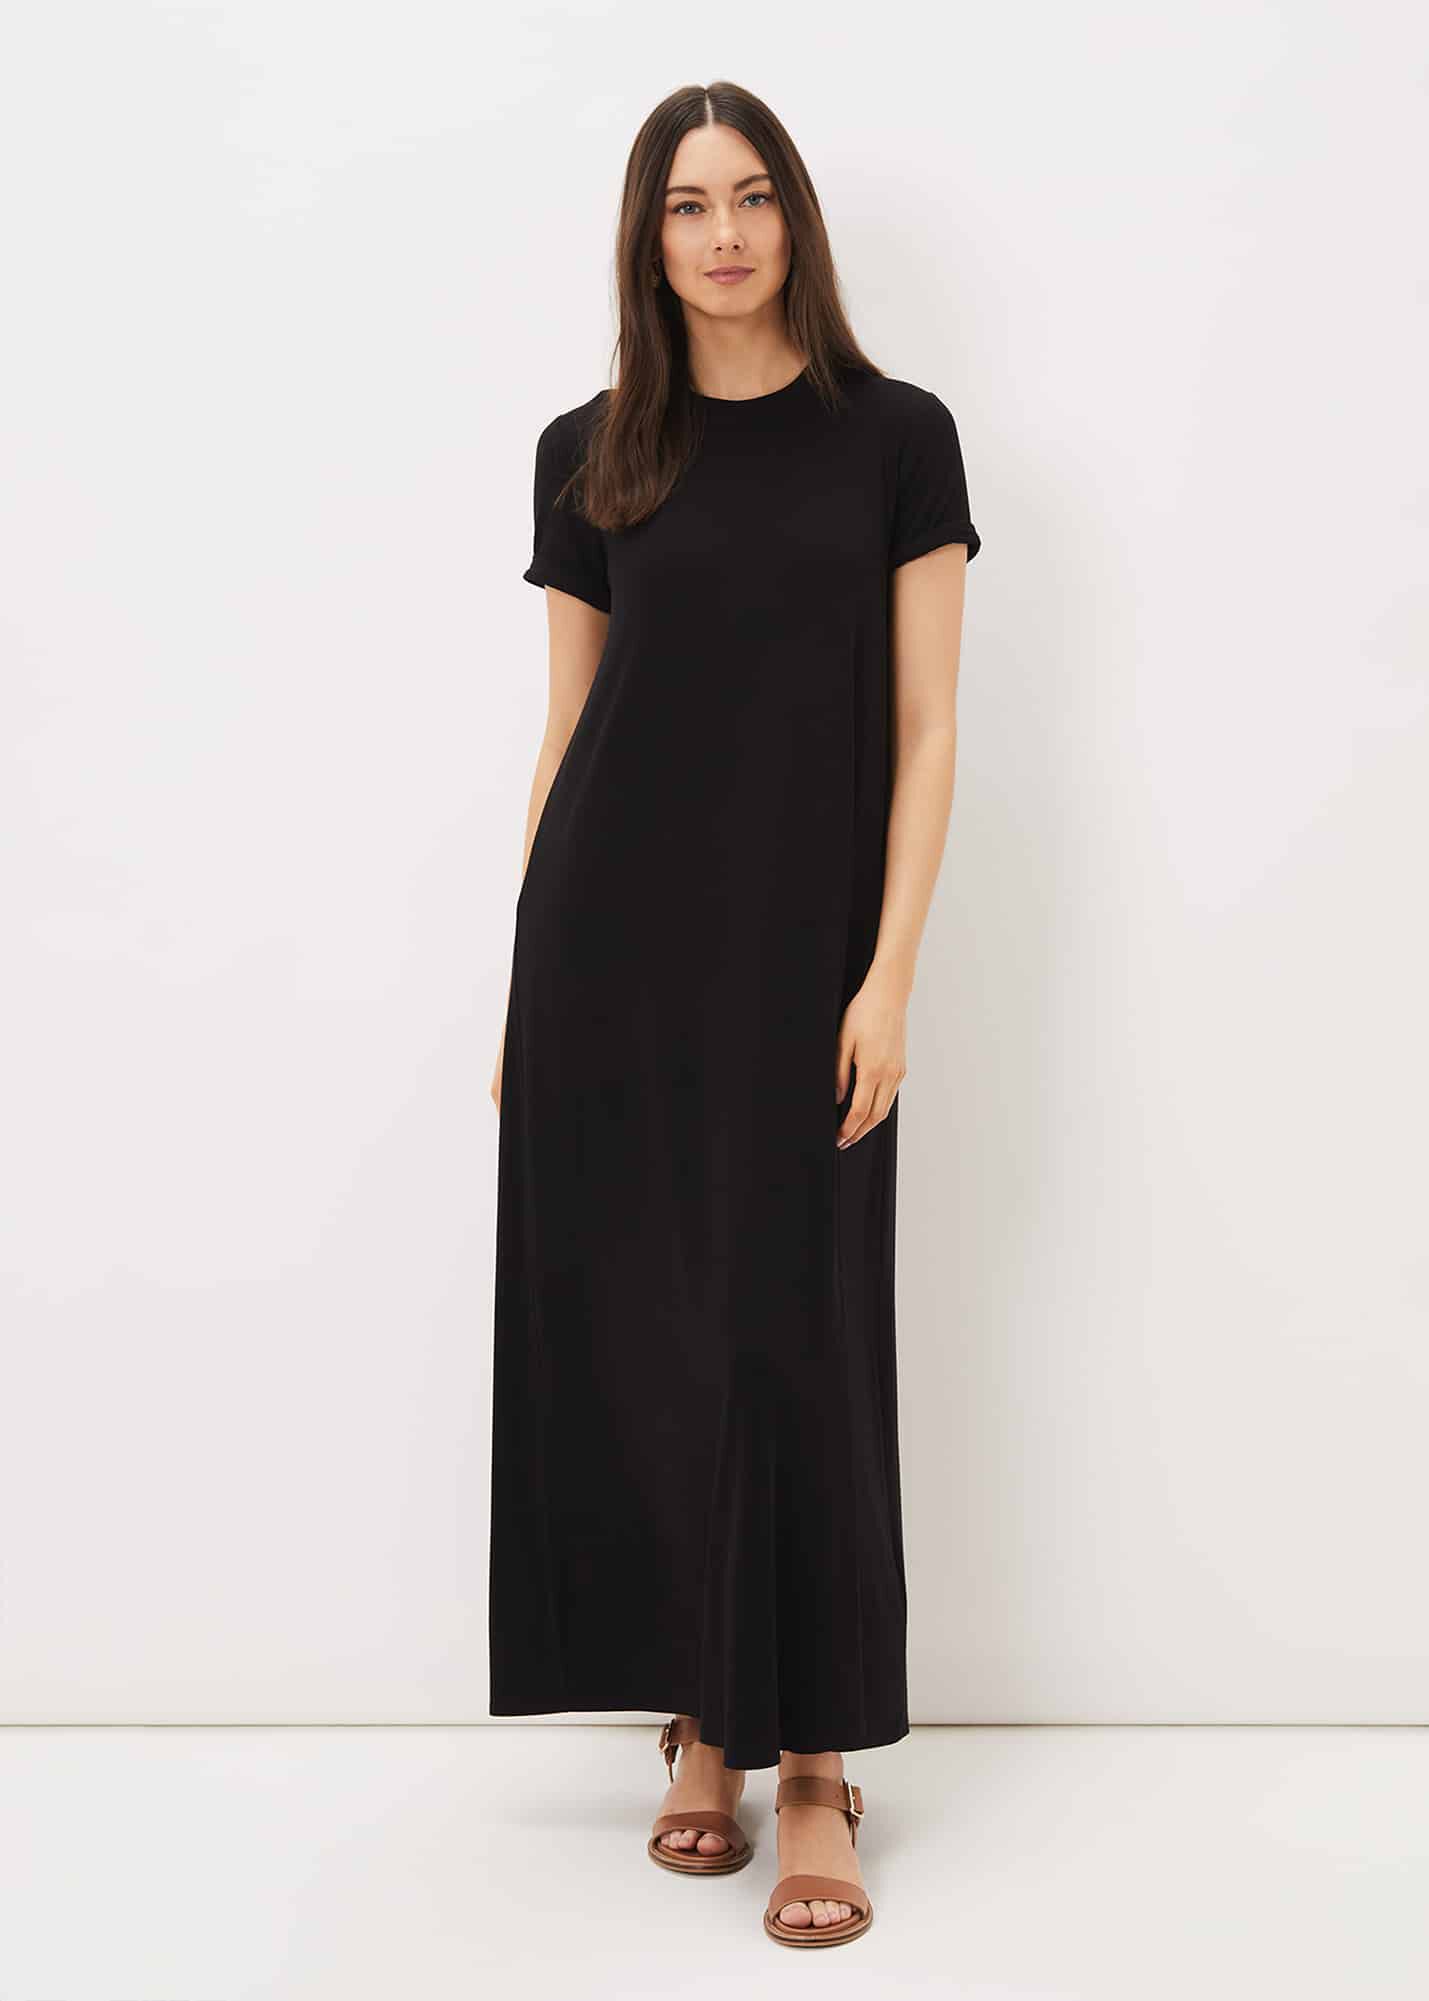 Dresses With Sleeves | Phase Eight | Phase Eight